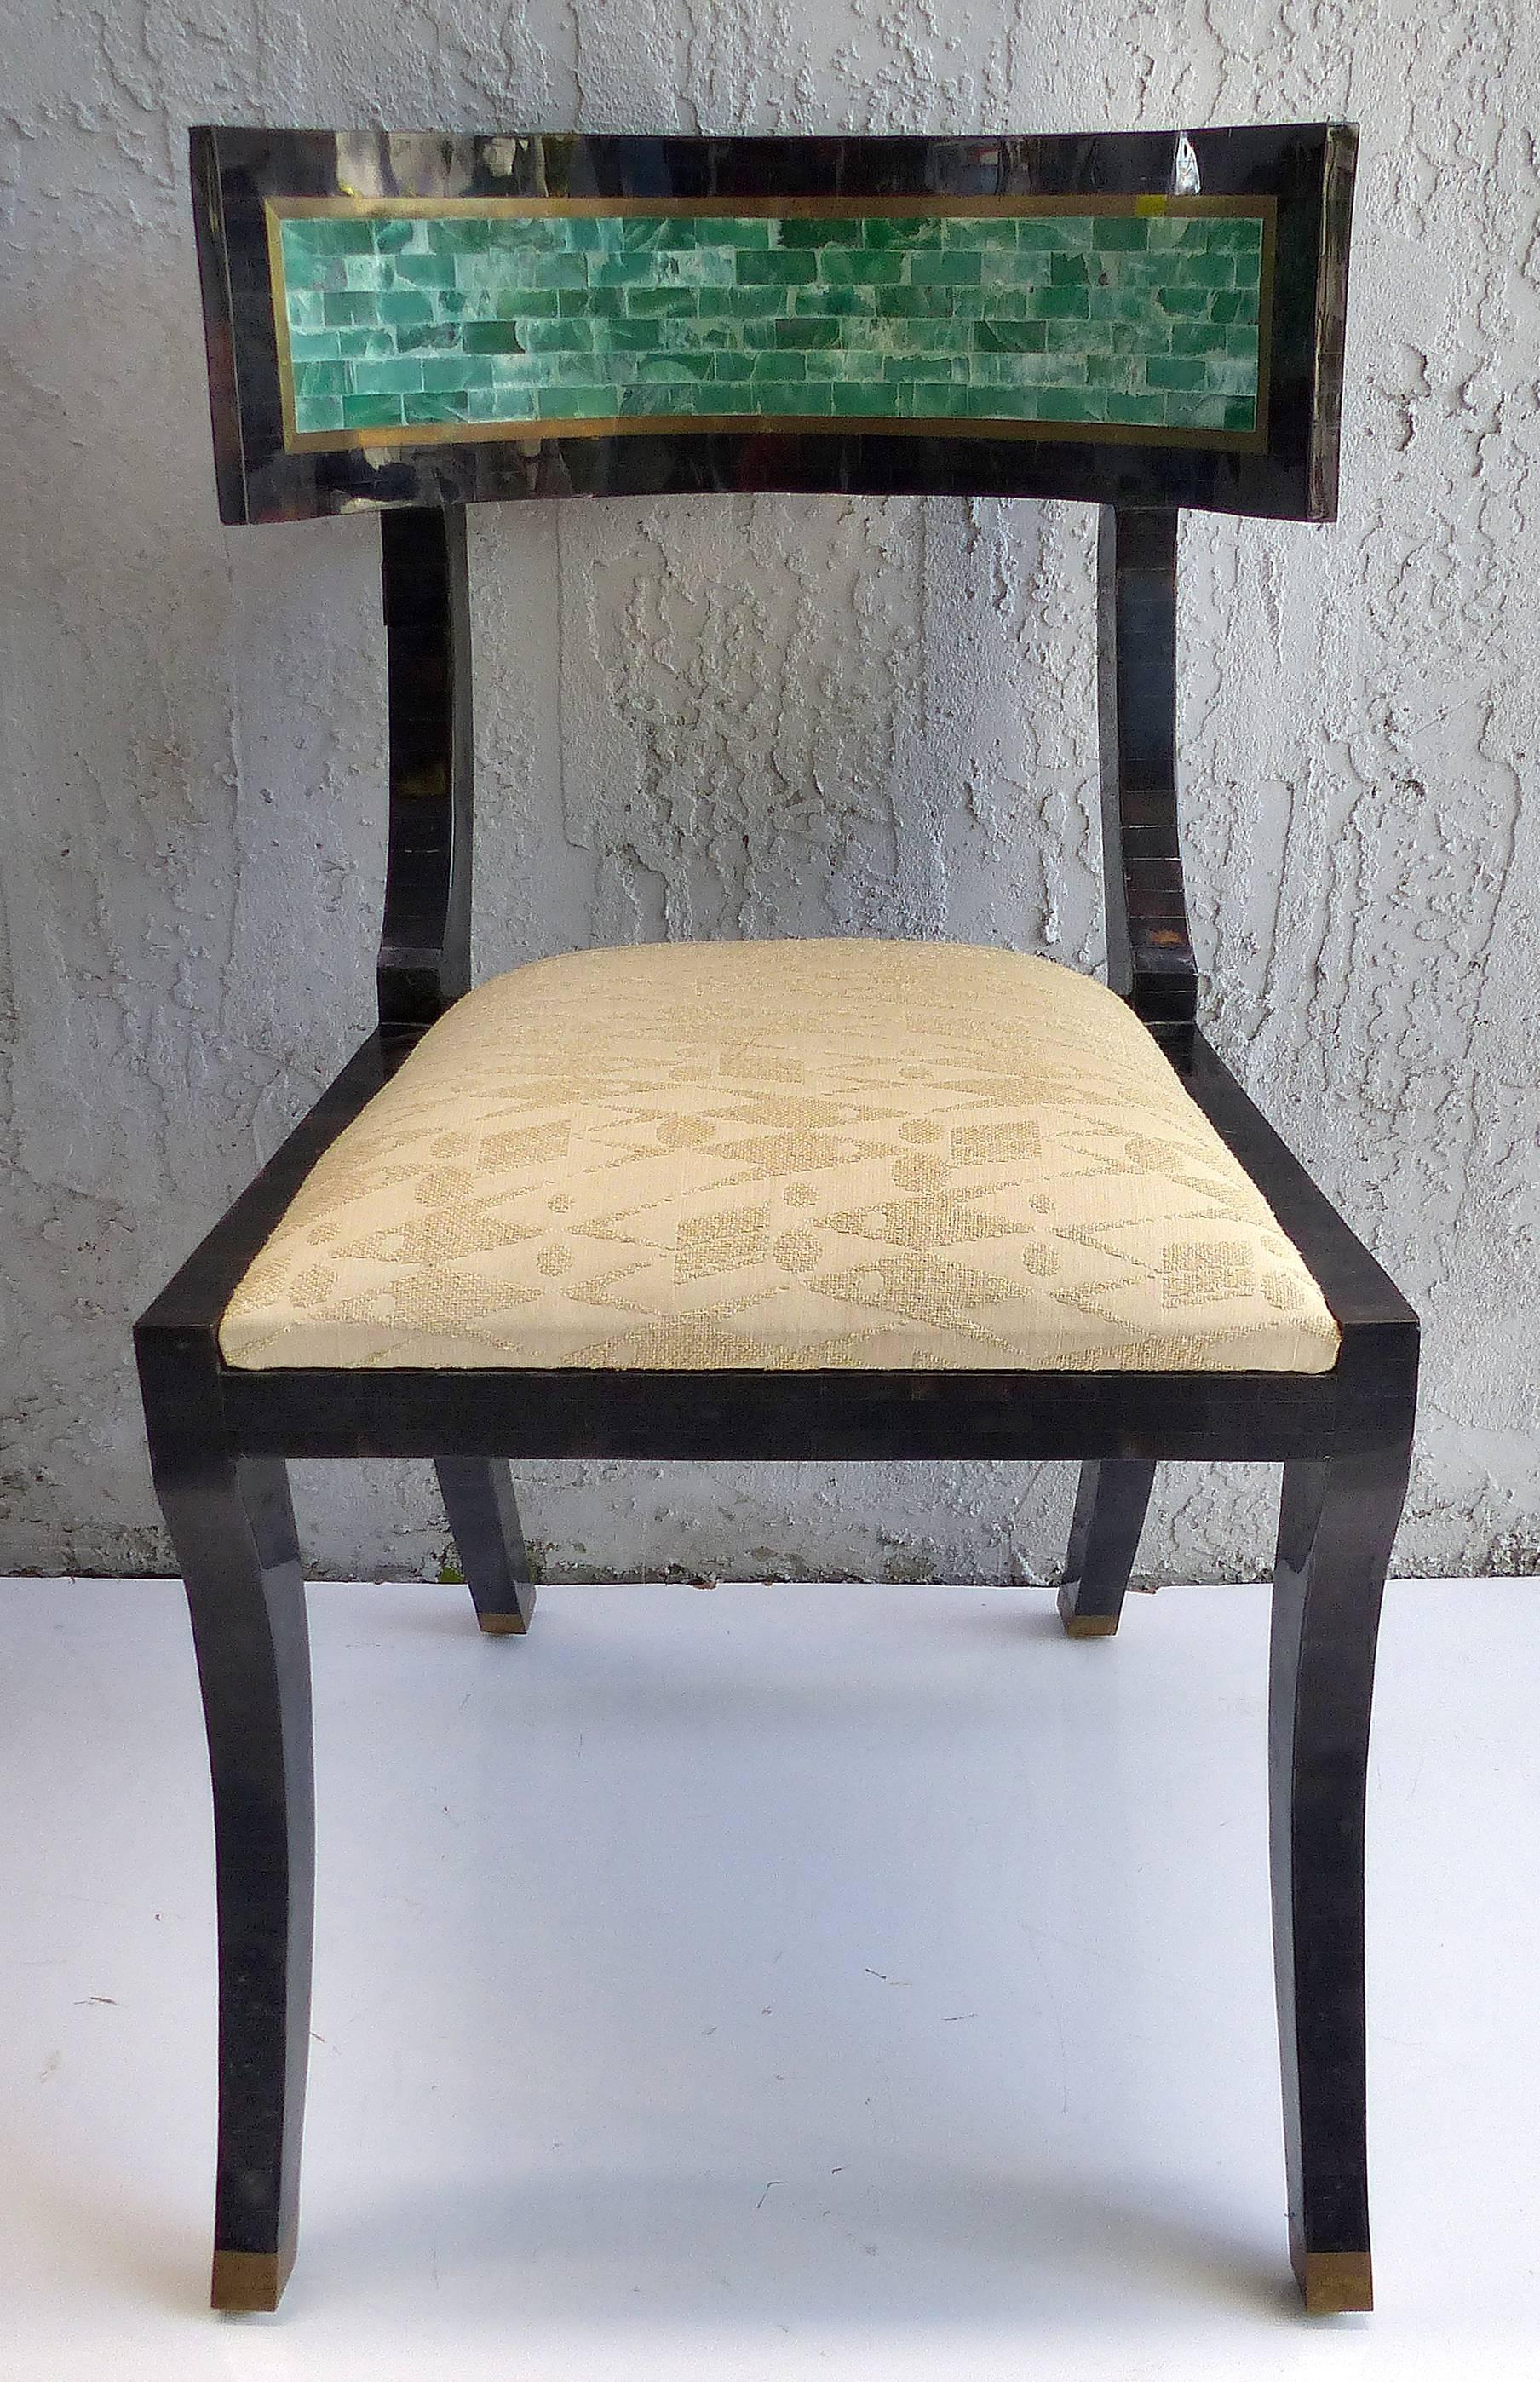 Offered for sale is an elegant and sensual Mid-Century Modern Klismos chair from Maitland-Smith clad in tessellated horn with tessellated stone on the backrest. The entire chair is covered in the horn tiles and the curved backrest has tessellated